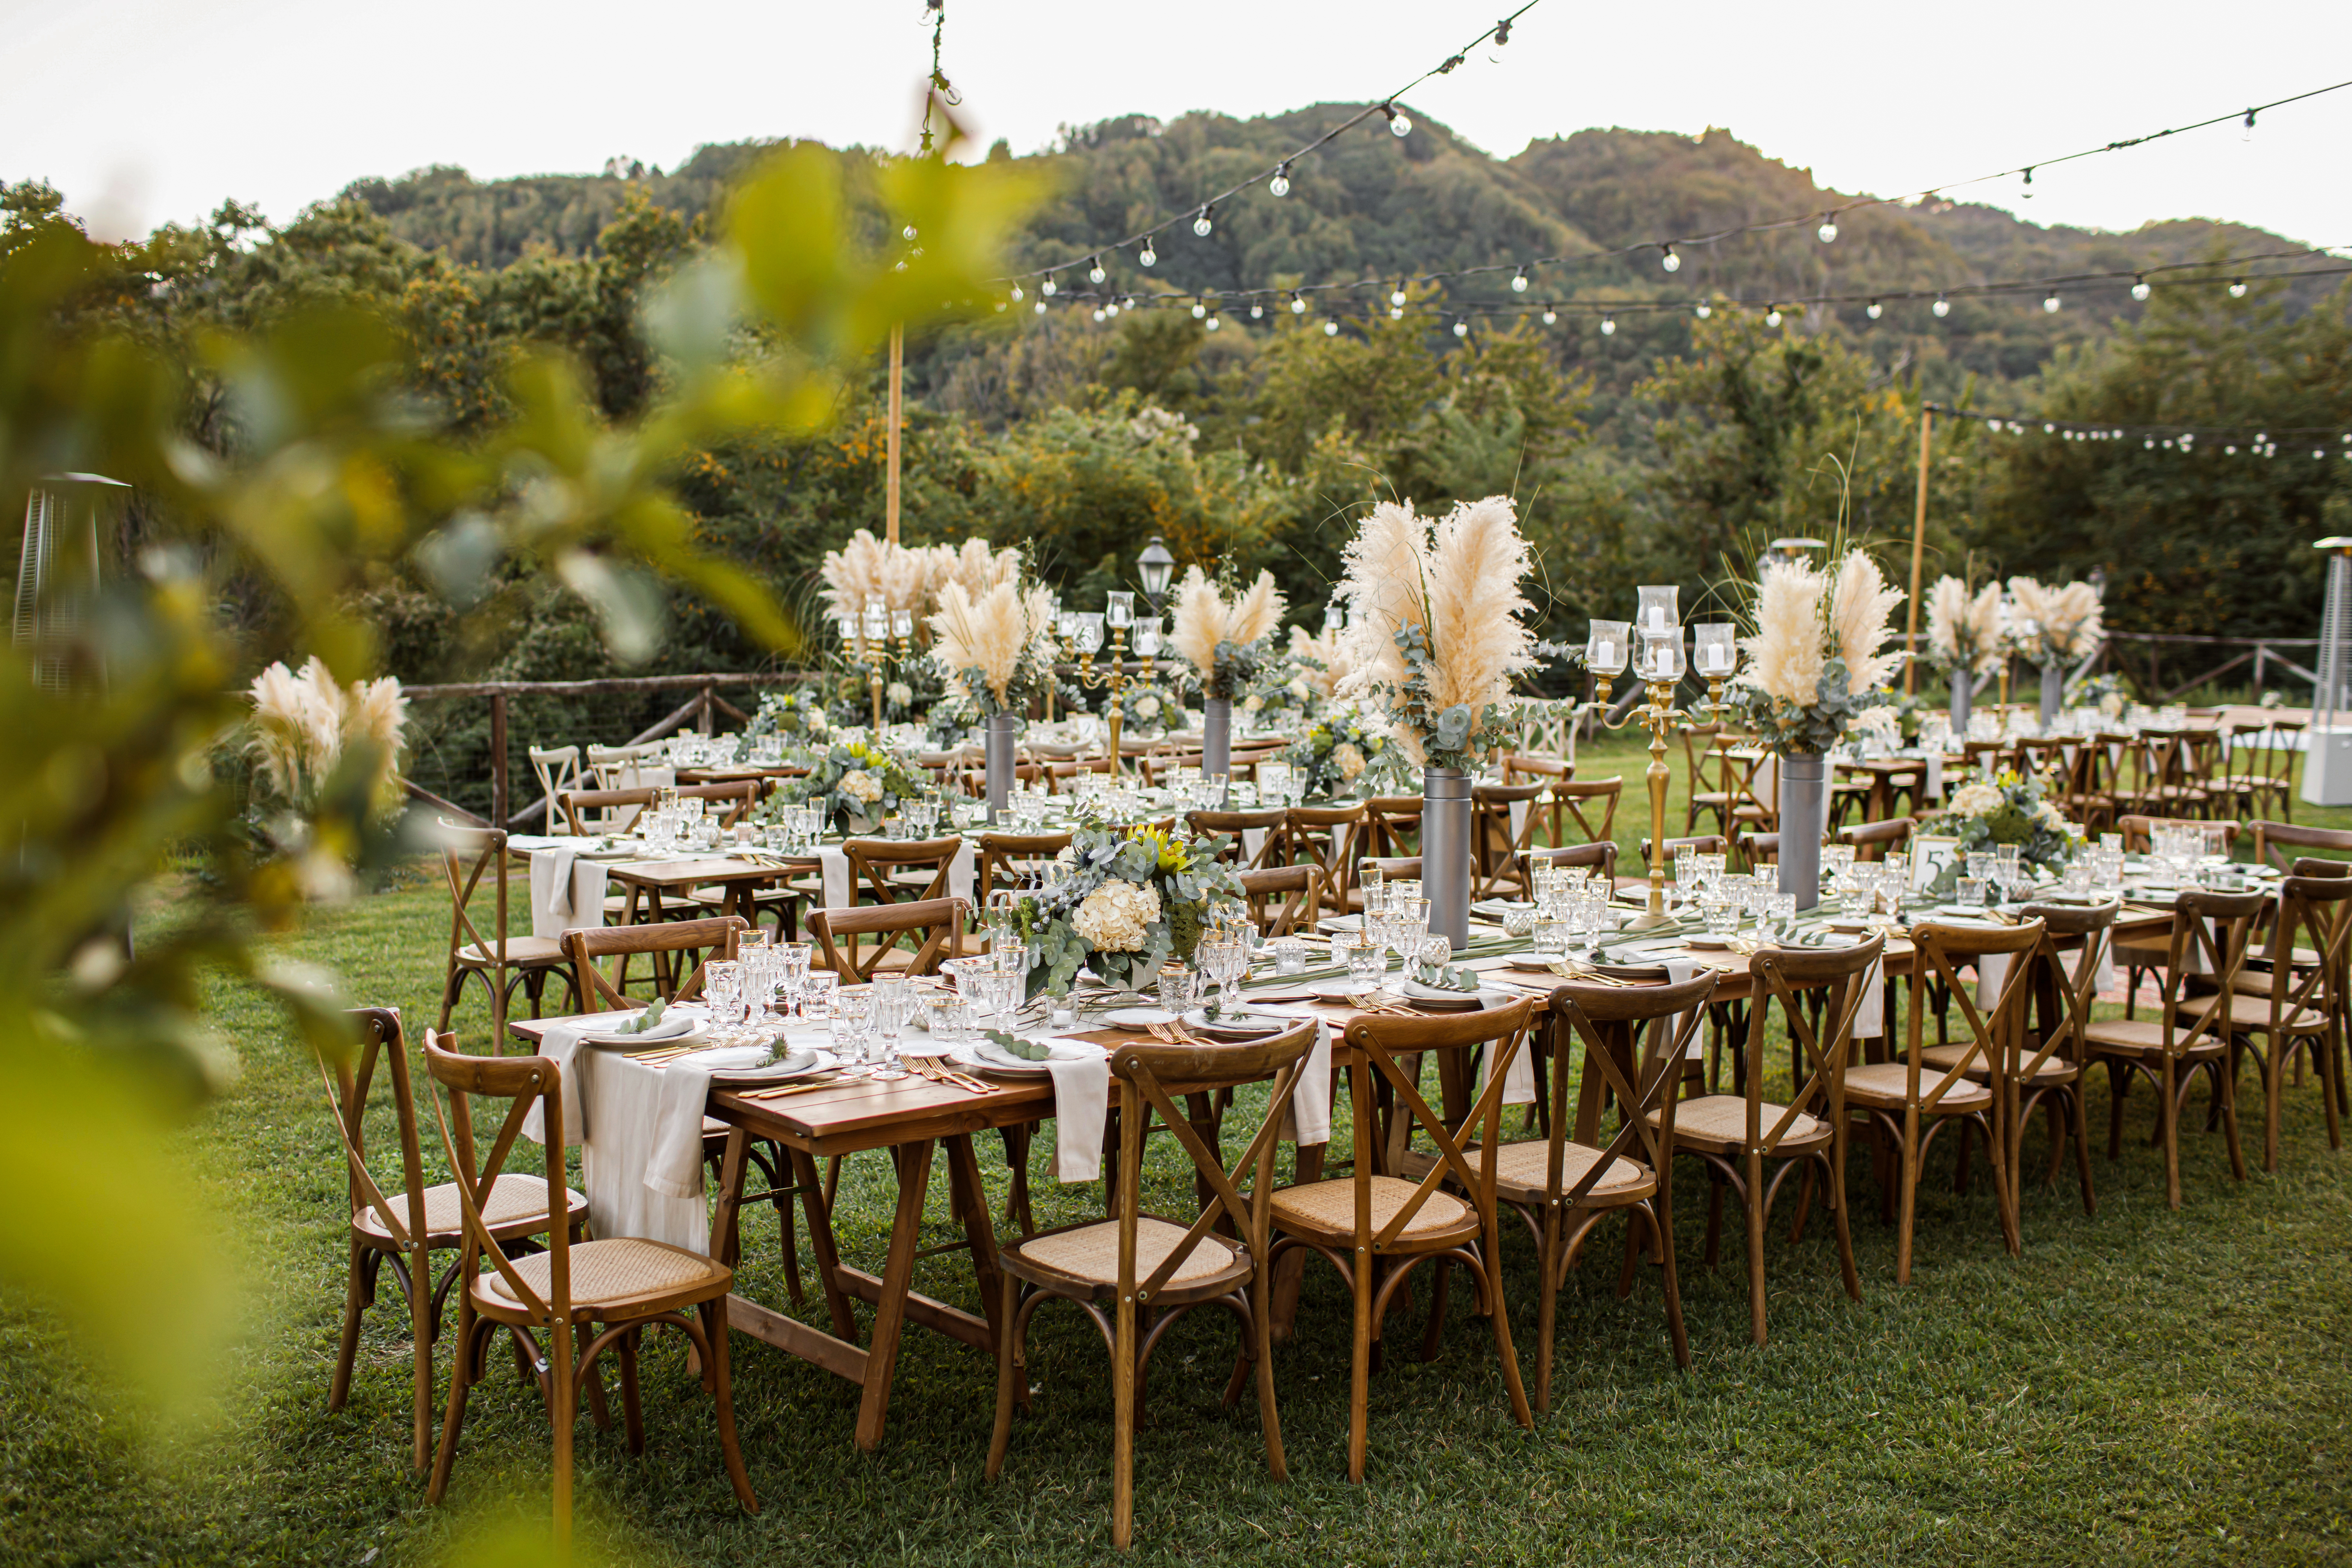 A table set up for guests at an outdoor event | Source: Shutterstock